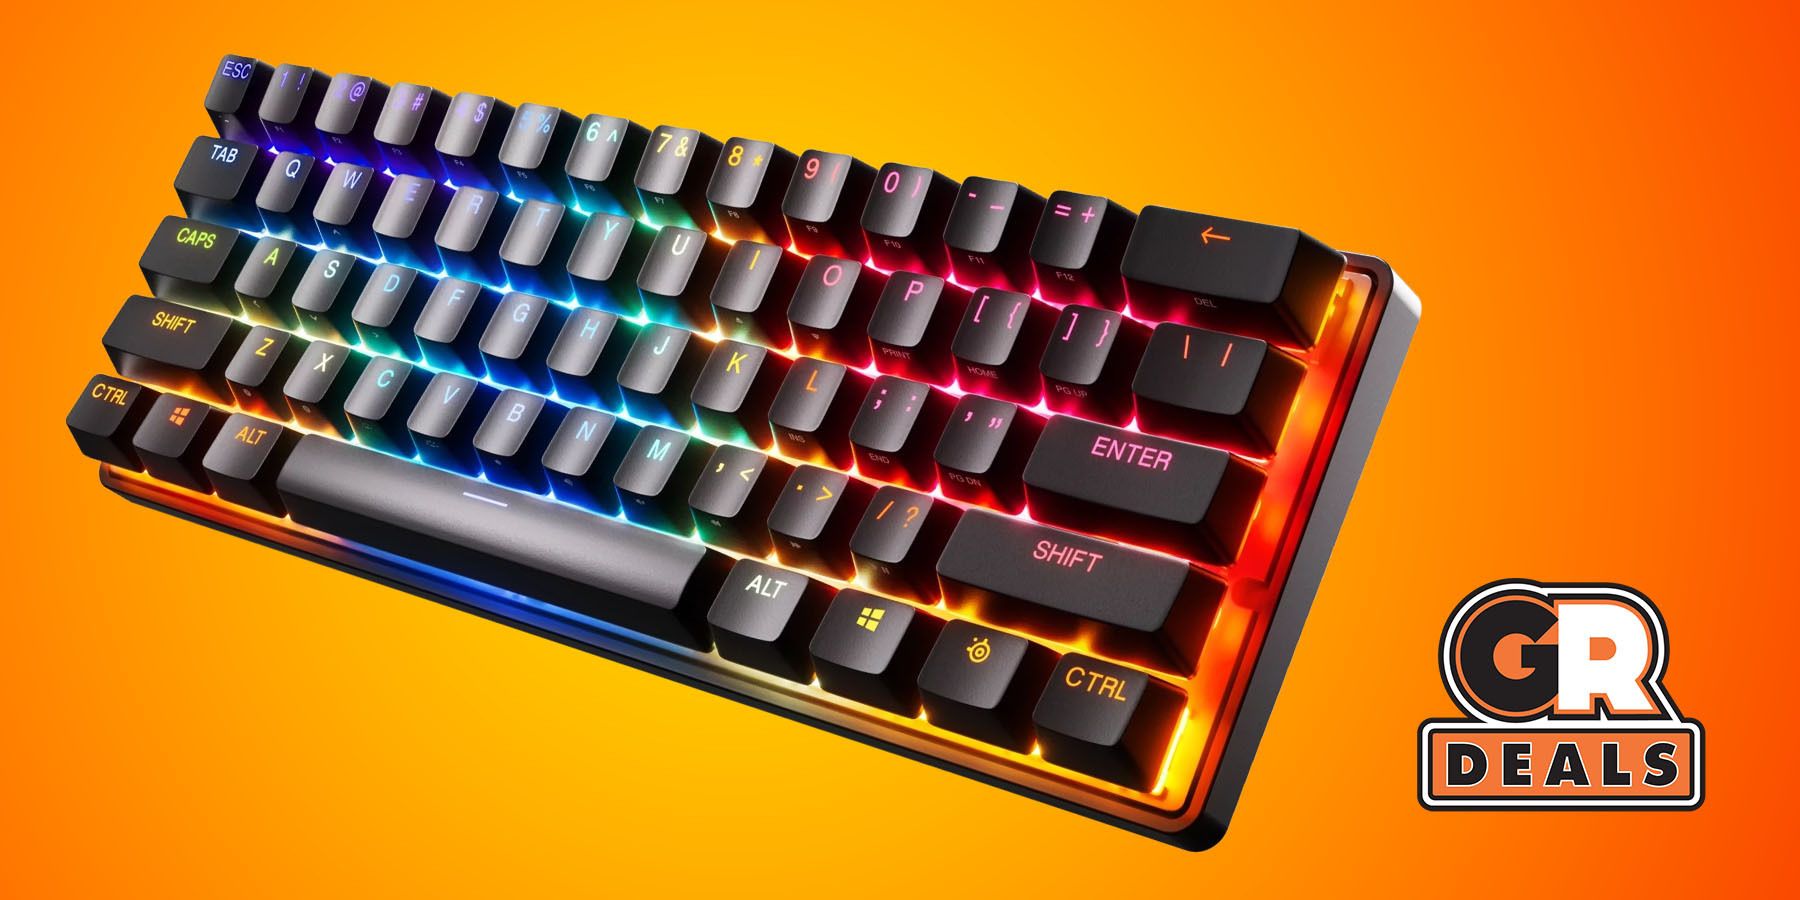 Get the SteelSeries New Apex 9 Mini Gaming Keyboard for the